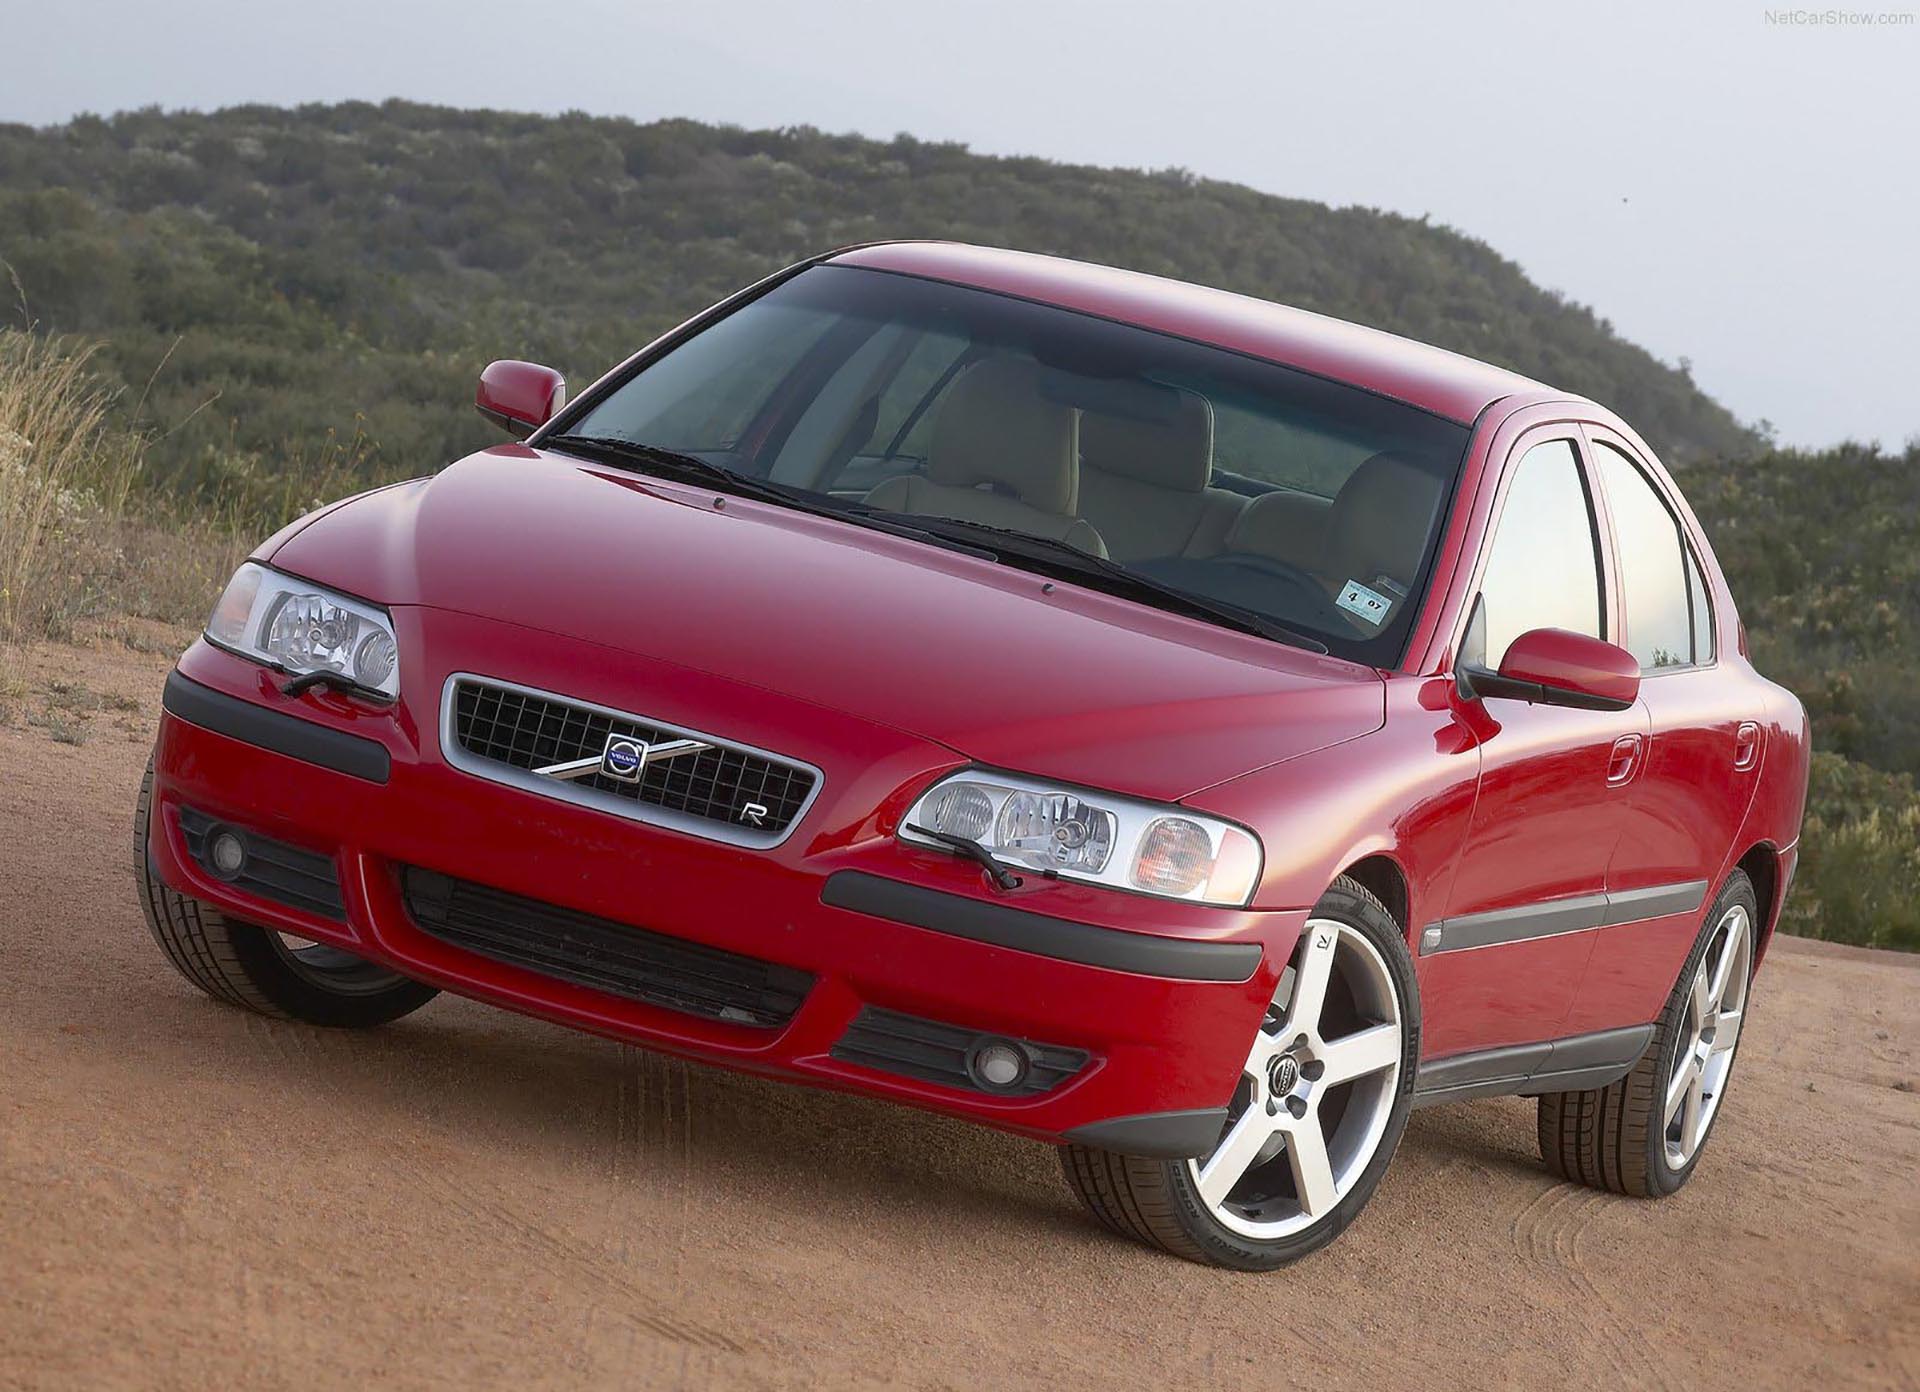 04_Volvo S60 R front